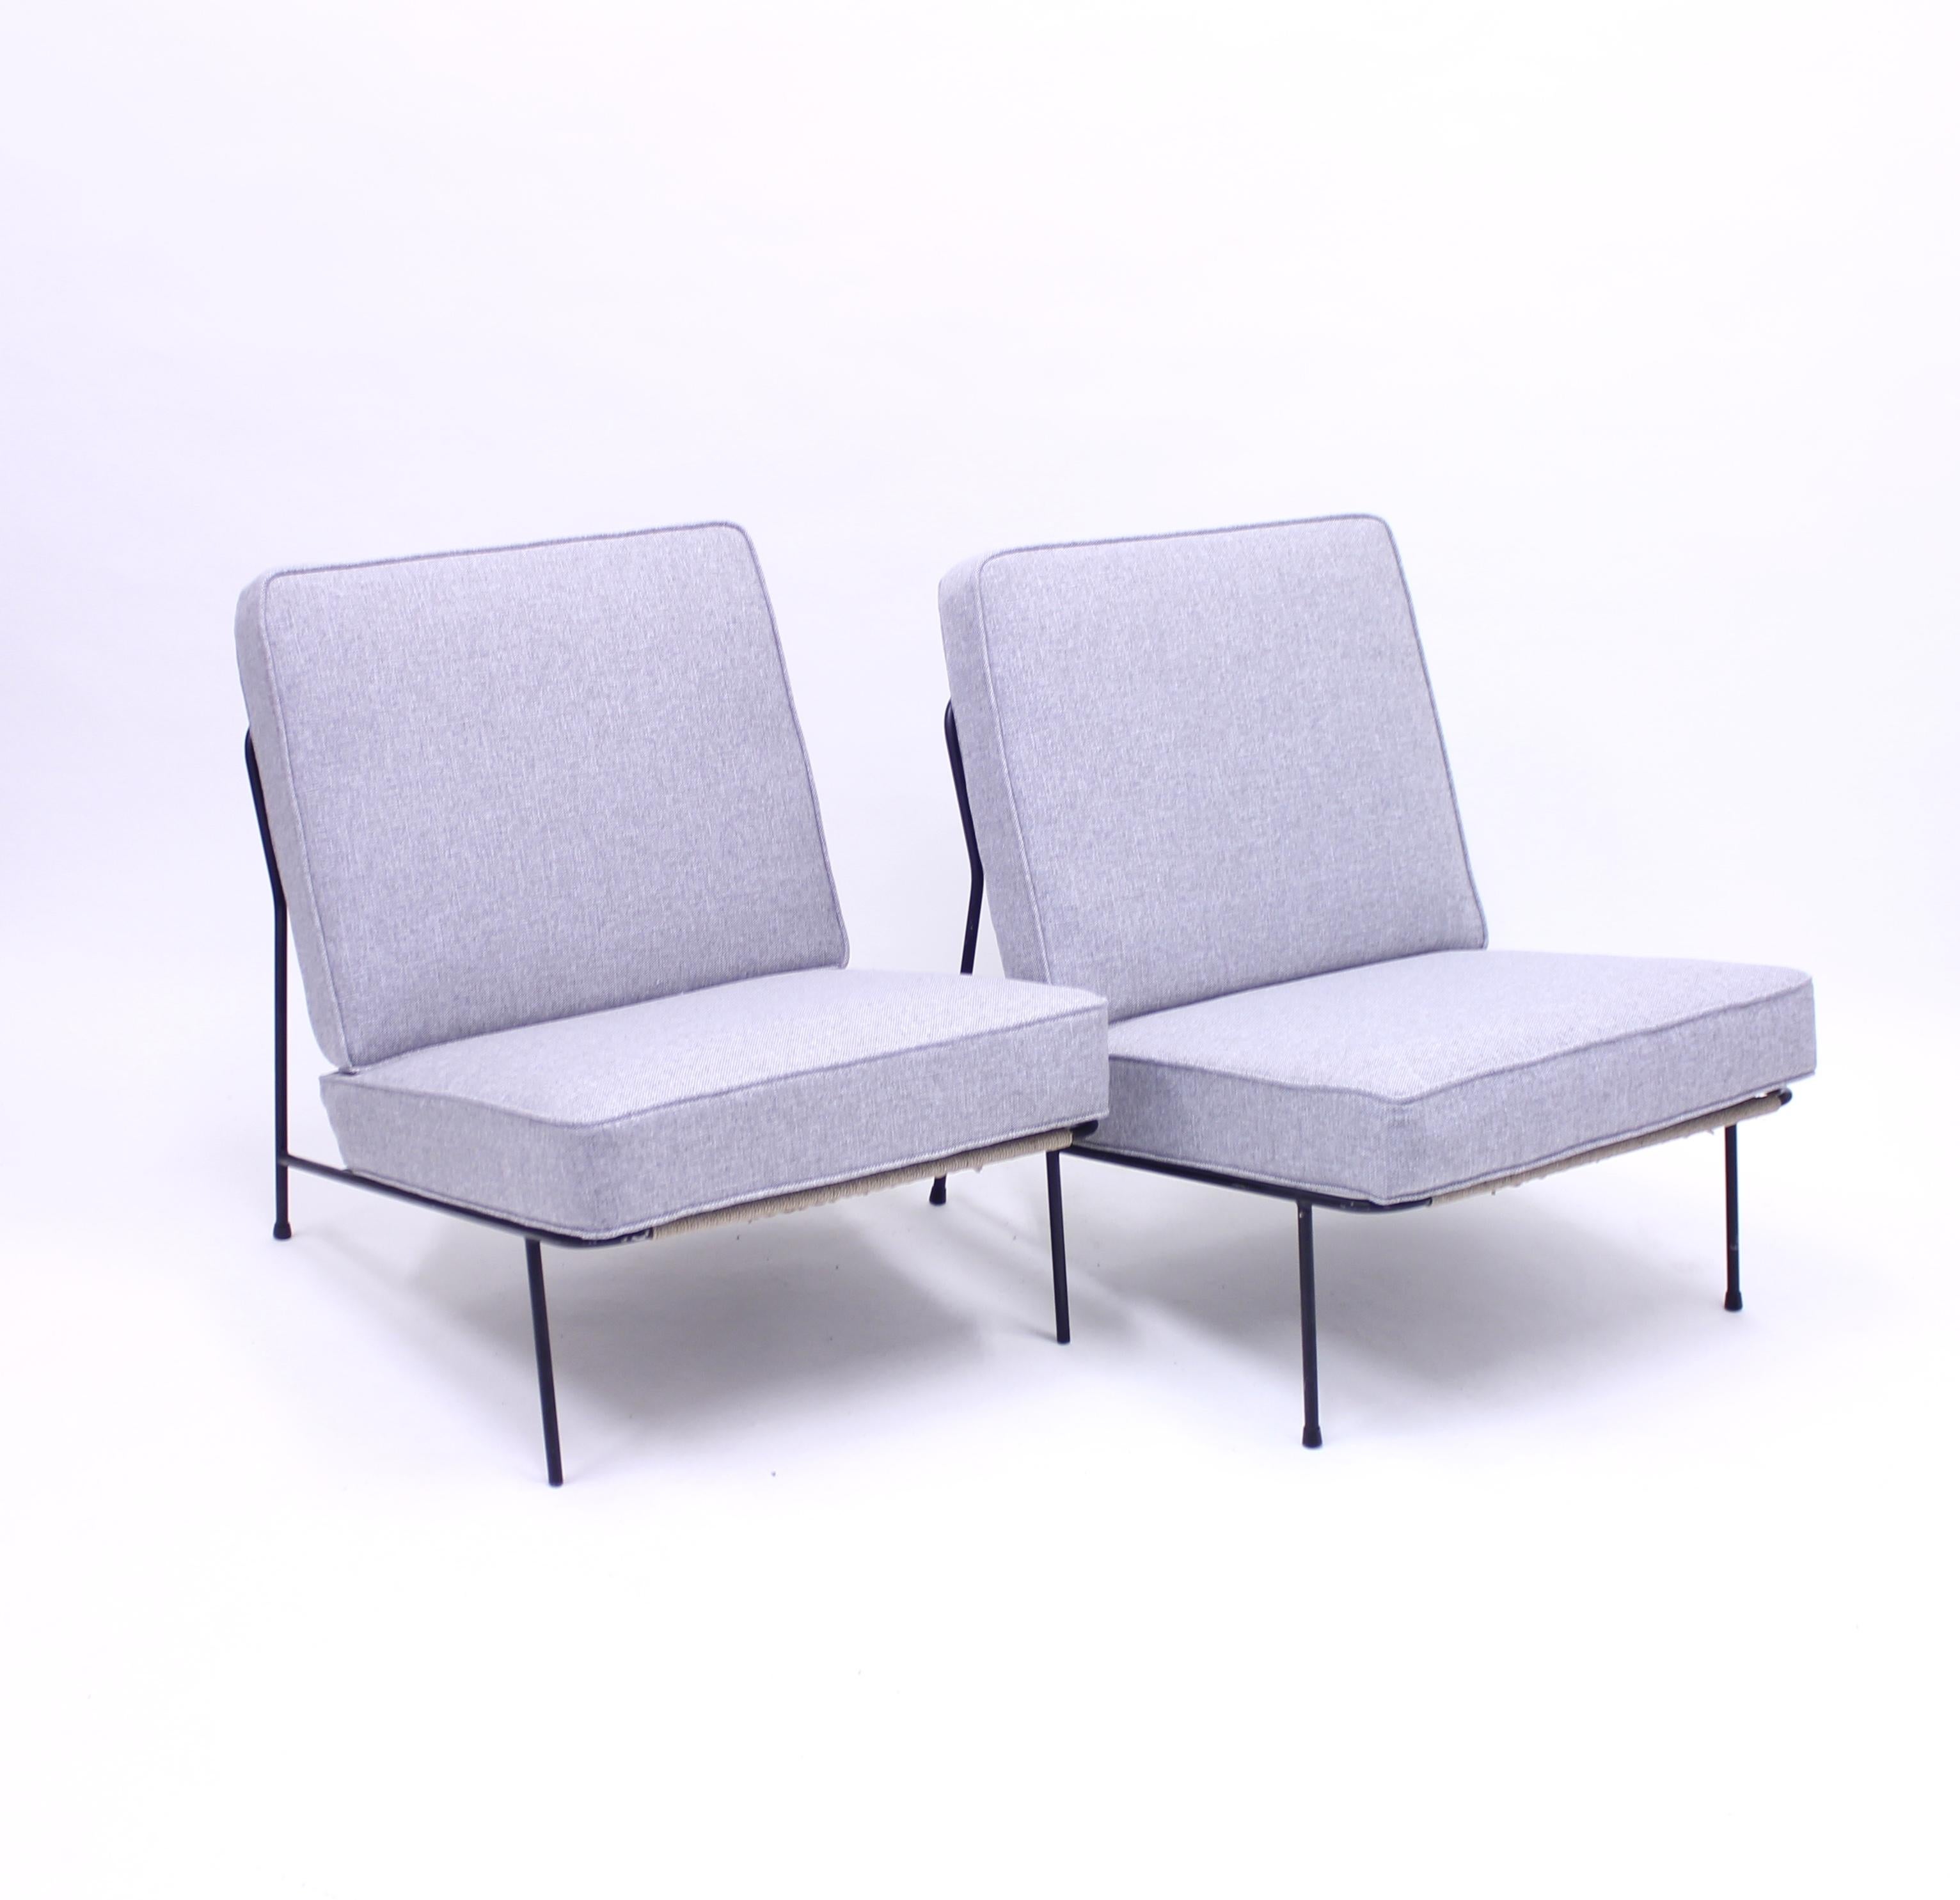 Pair of lounge chairs designed by Alf Svensson for DUX / Ljungs Industrier and their furniture line Bra Bohag in the 1950s. The model was shown at the very well known H55 exhibition in 1955 in Helsingborg, Sweden which is one of the highlights of